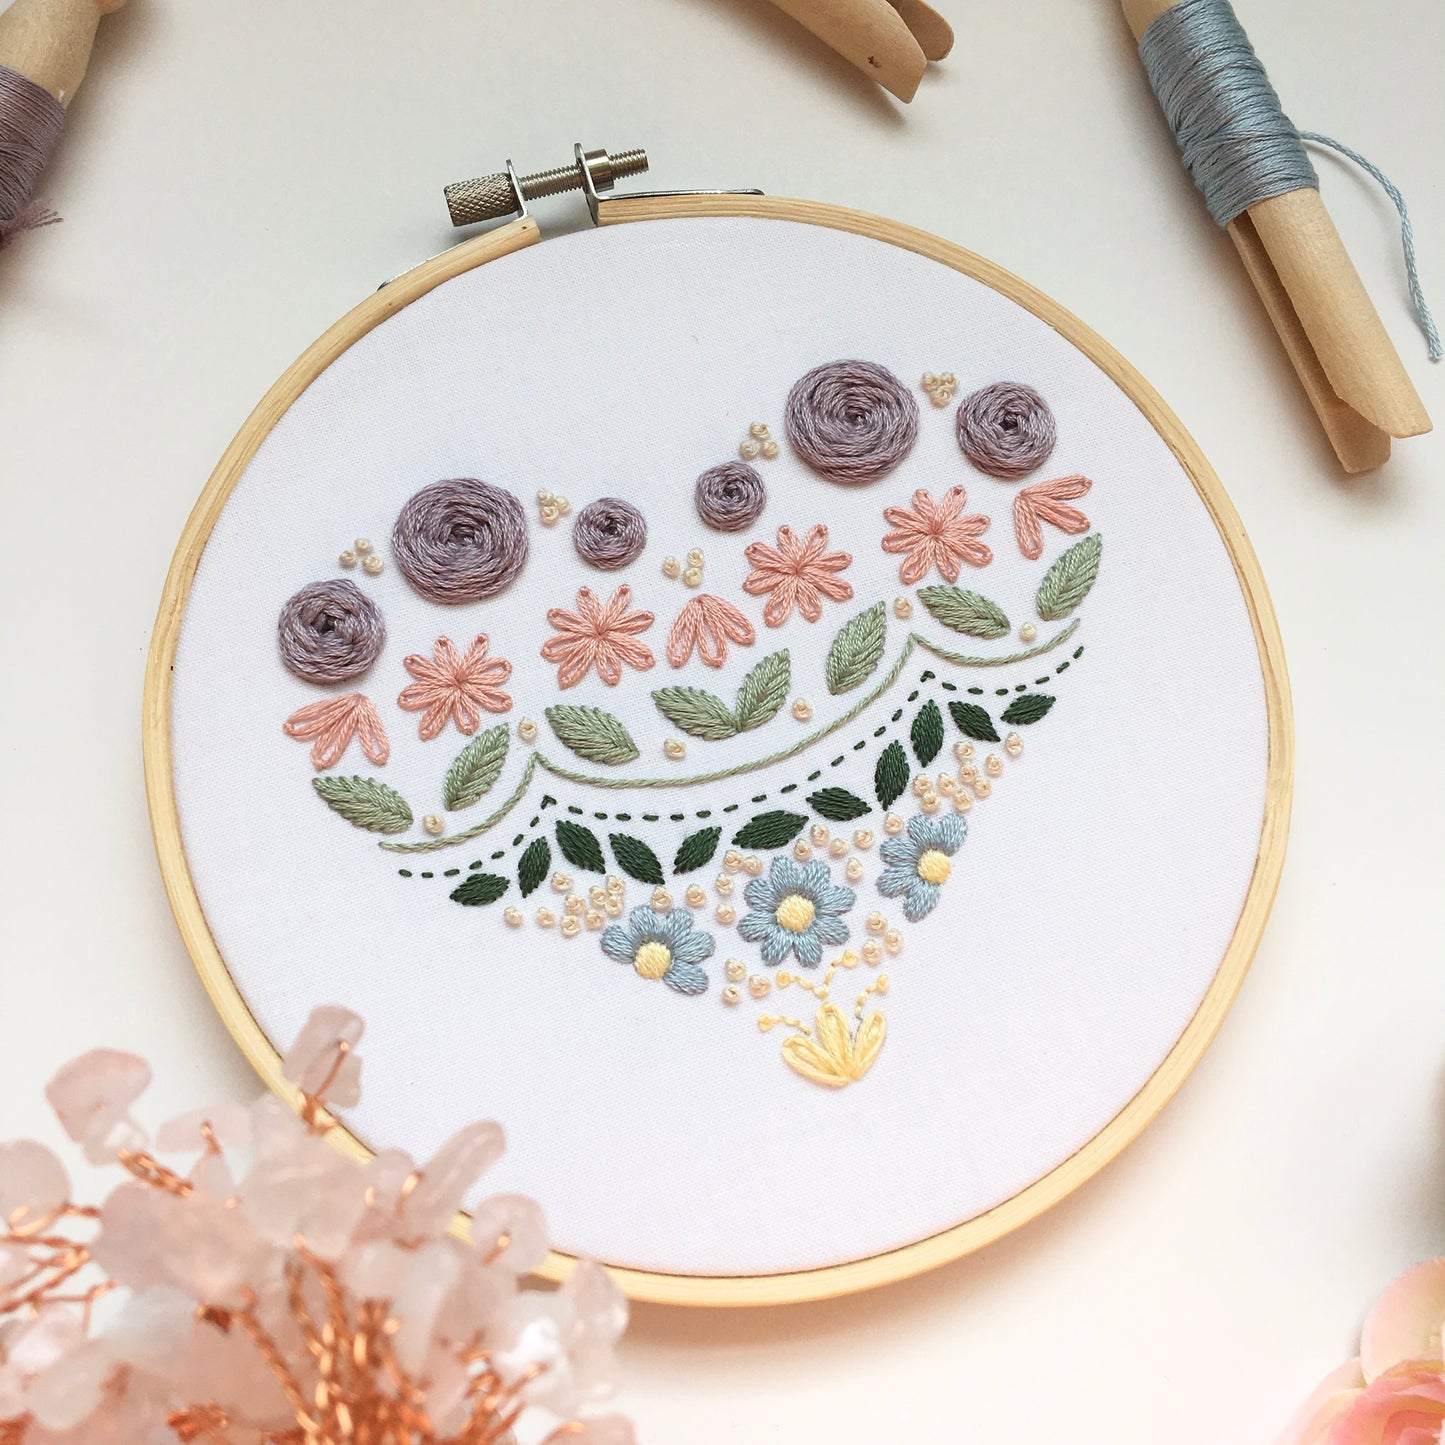 enchanting heart sampler embroidery kit by Eight22Crafts